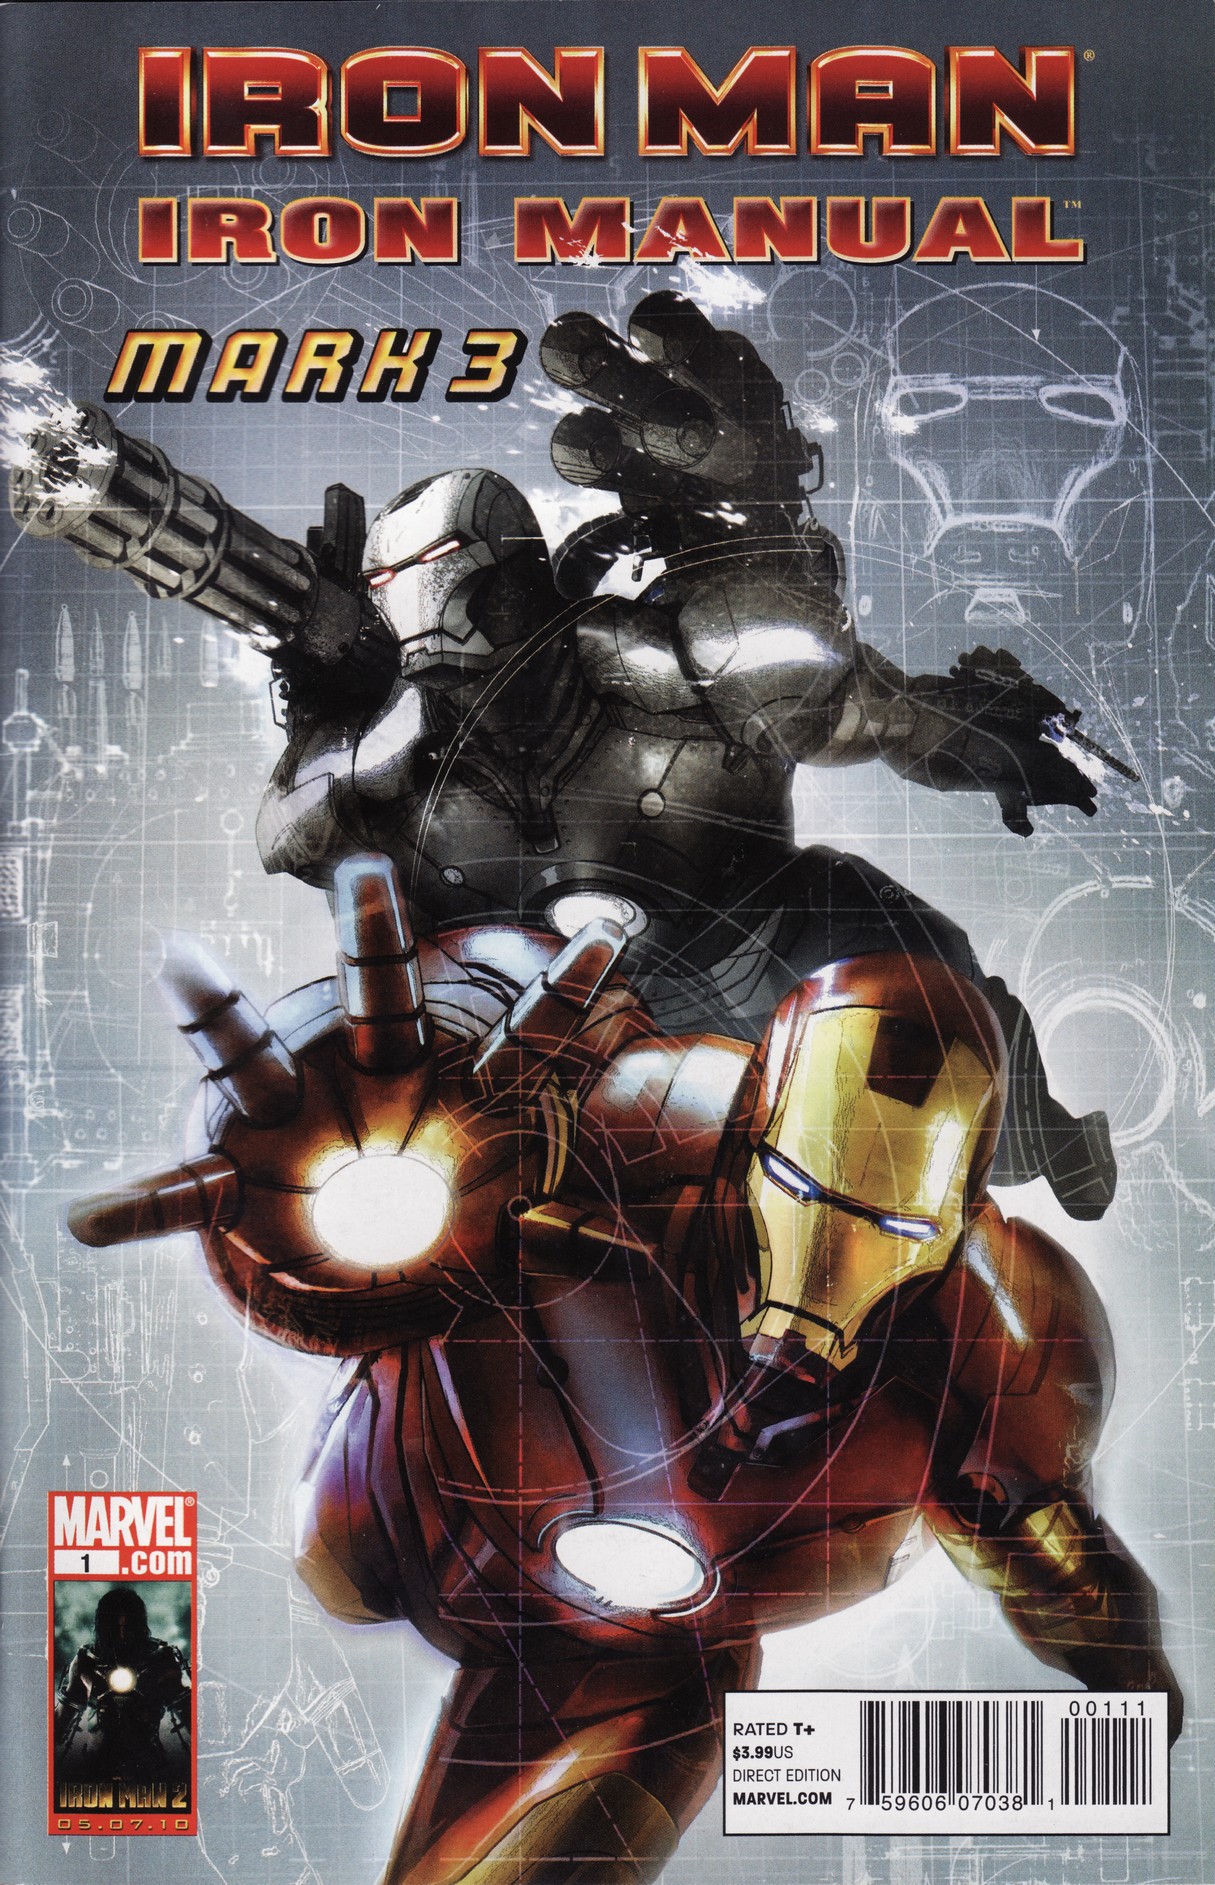 Read online Iron Manual Mark 3 comic -  Issue # Full - 1